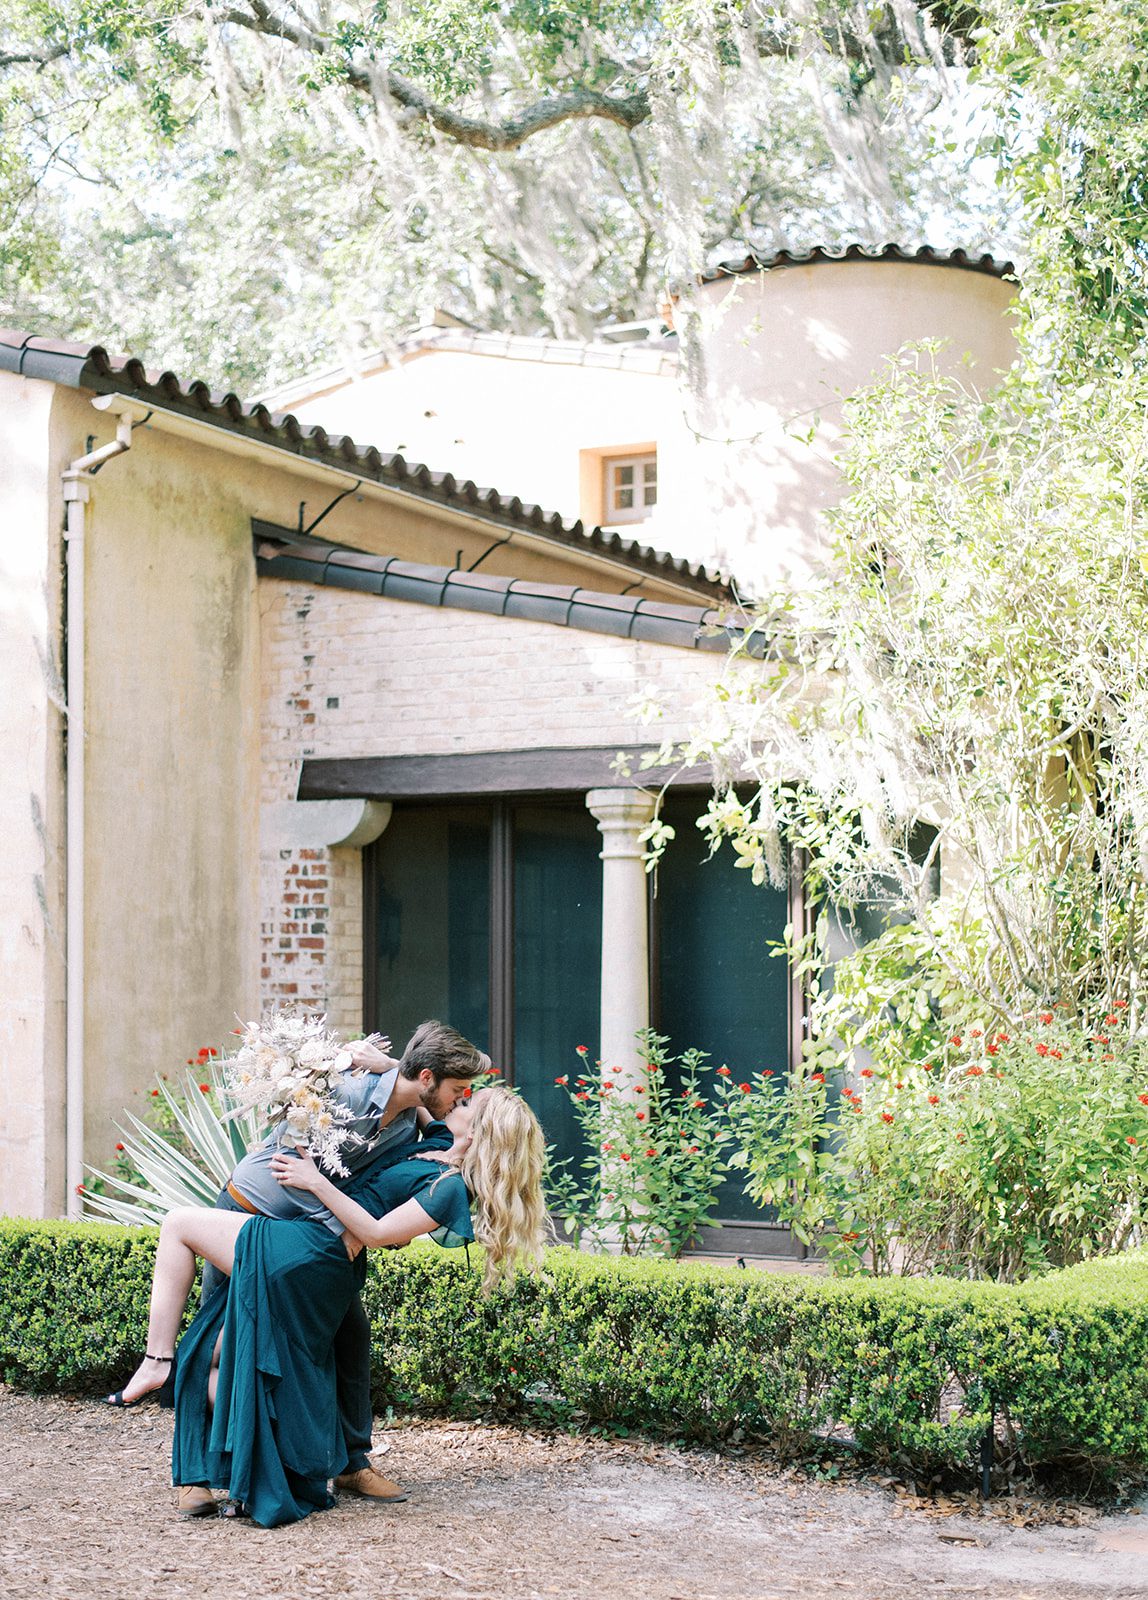 man and woman in Bok Tower Gardens for their engagement session with Tampa wedding photographer, they are infront of a smaller structure and garden landscape with the man dipping the woman as her emerald green gown's slit opens to reveal her leg